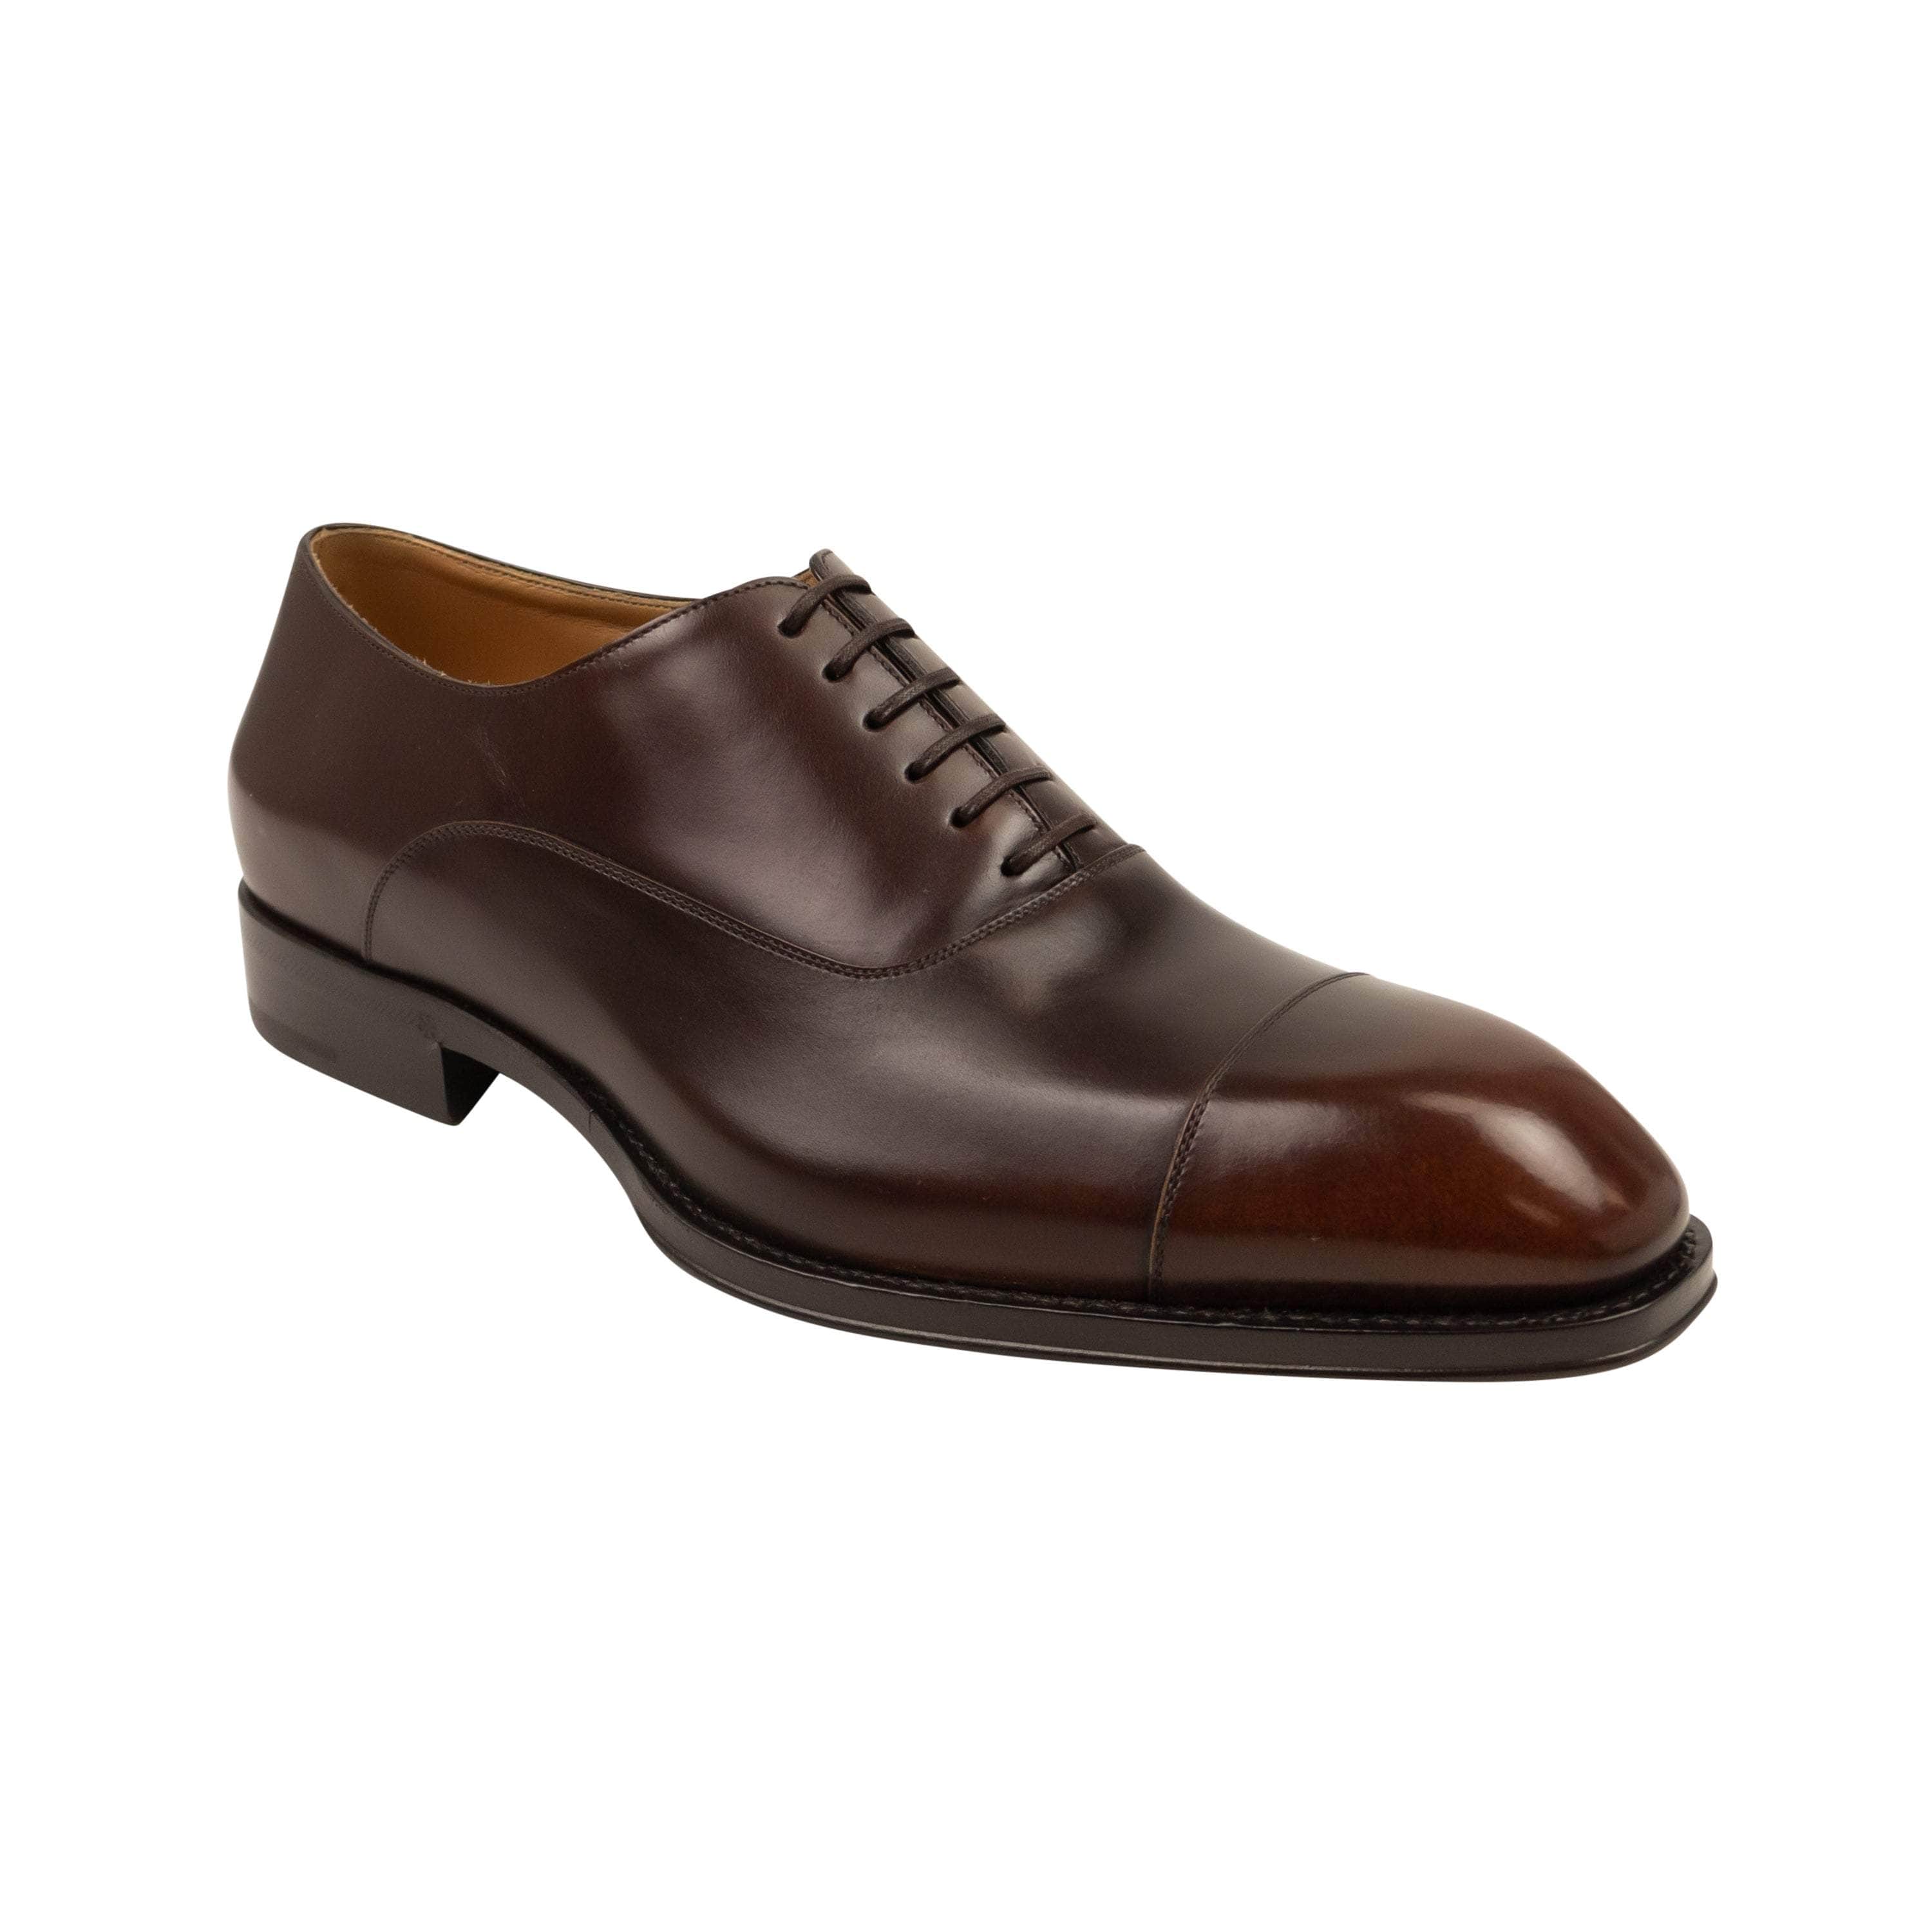 Louis Vuitton 500-750, channelenable-all, chicmi, couponcollection, gender-mens, main-shoes, mens-oxfords-derby-shoes, mens-shoes, size-6, SPO, stadiumgoods 6 Brown Leather Lace Up Oxford 95-LVT-2104/6 95-LVT-2104/6